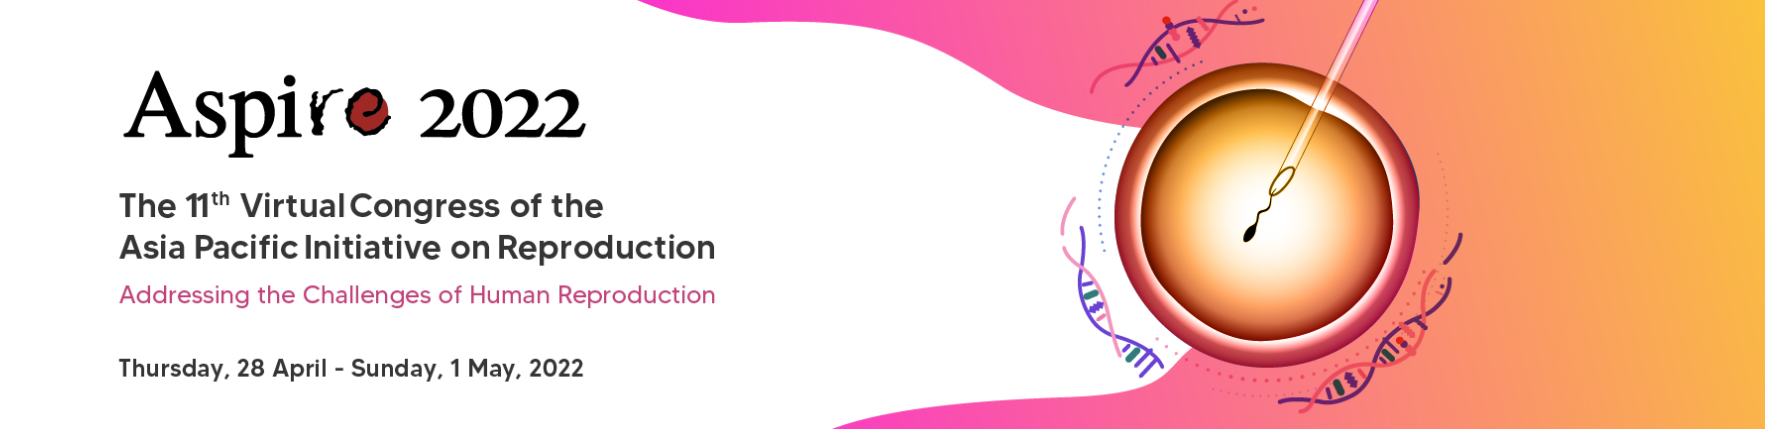 The 11th Virtual Congress of the Asia Pacific Initiative on Reproduction - ASPIRE 2022